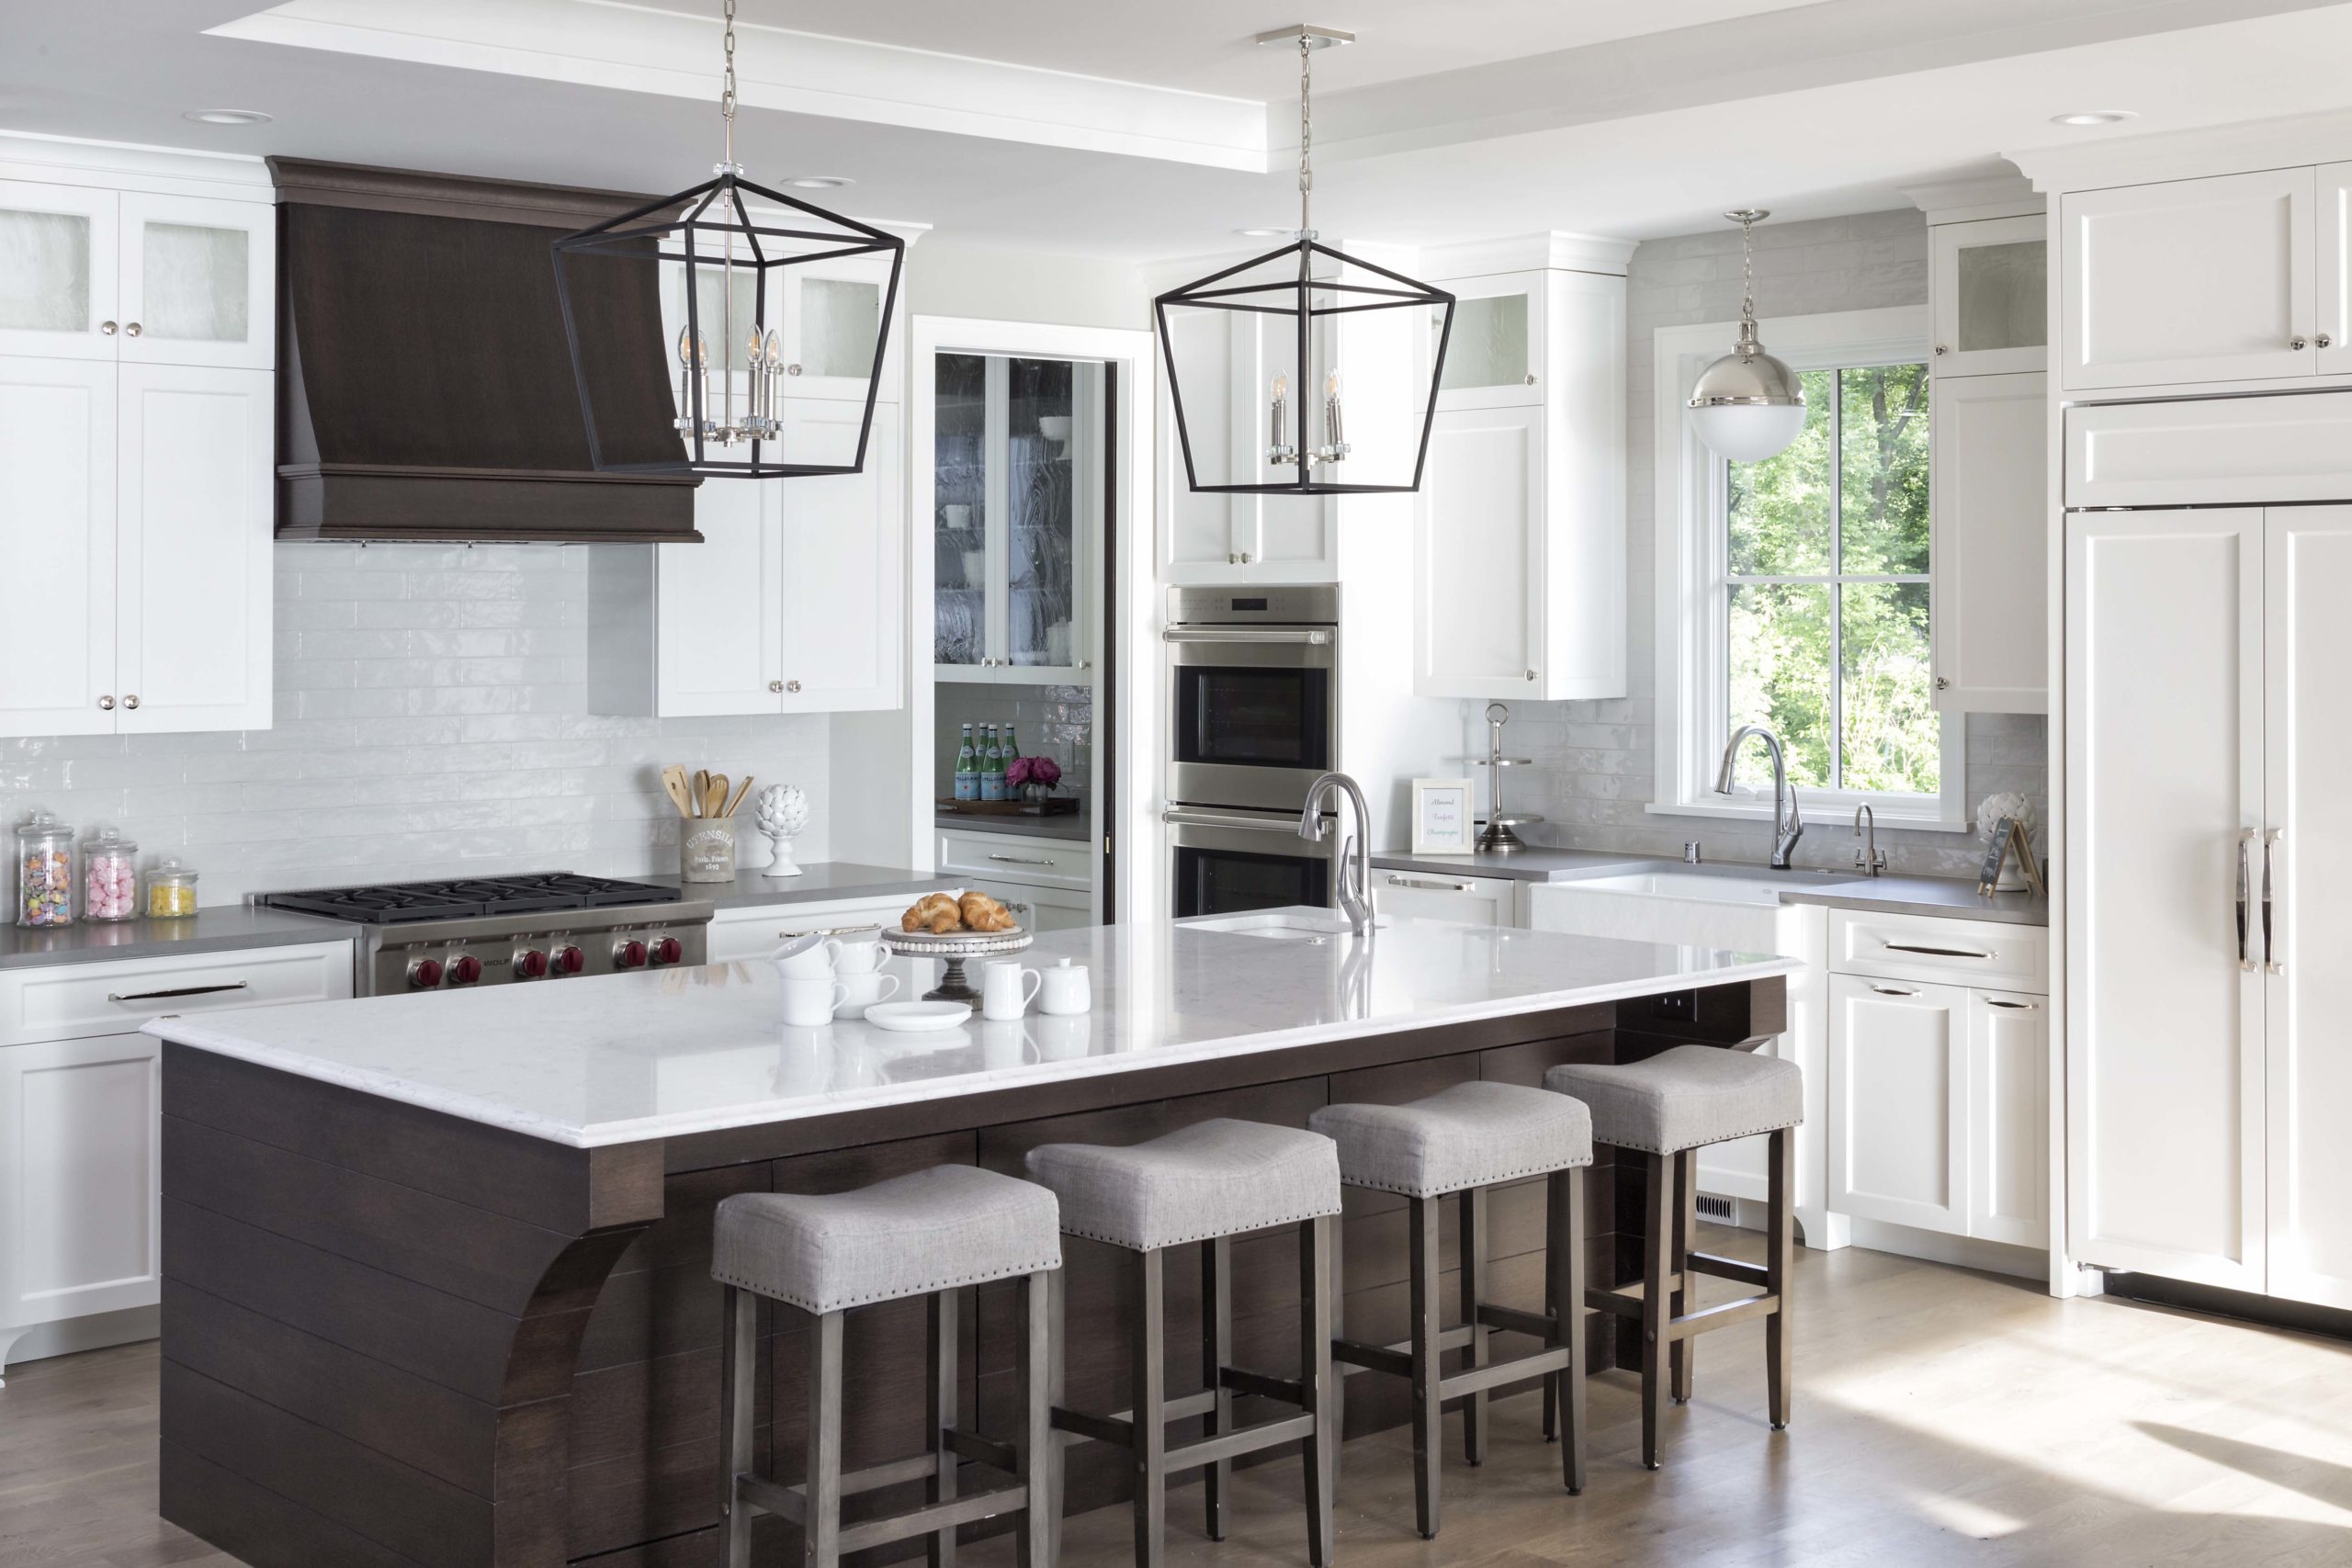 white kitchen with white countertops, dark brown island, and four stools at the island